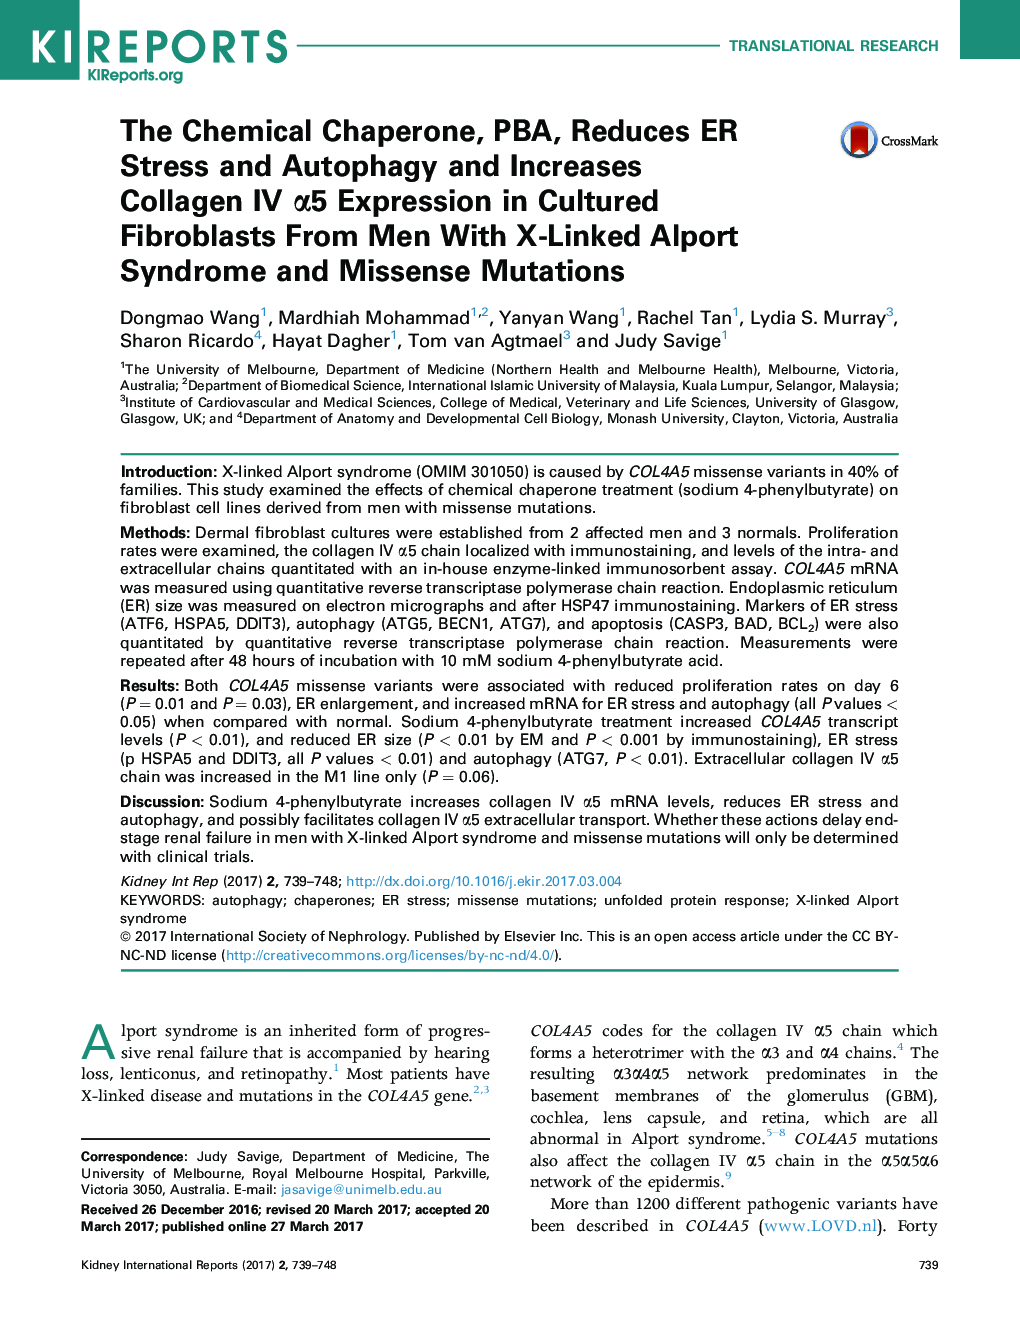 The Chemical Chaperone, PBA, Reduces ER Stress and Autophagy and Increases Collagen IV Î±5 Expression in Cultured Fibroblasts From Men With X-Linked Alport Syndrome and Missense Mutations